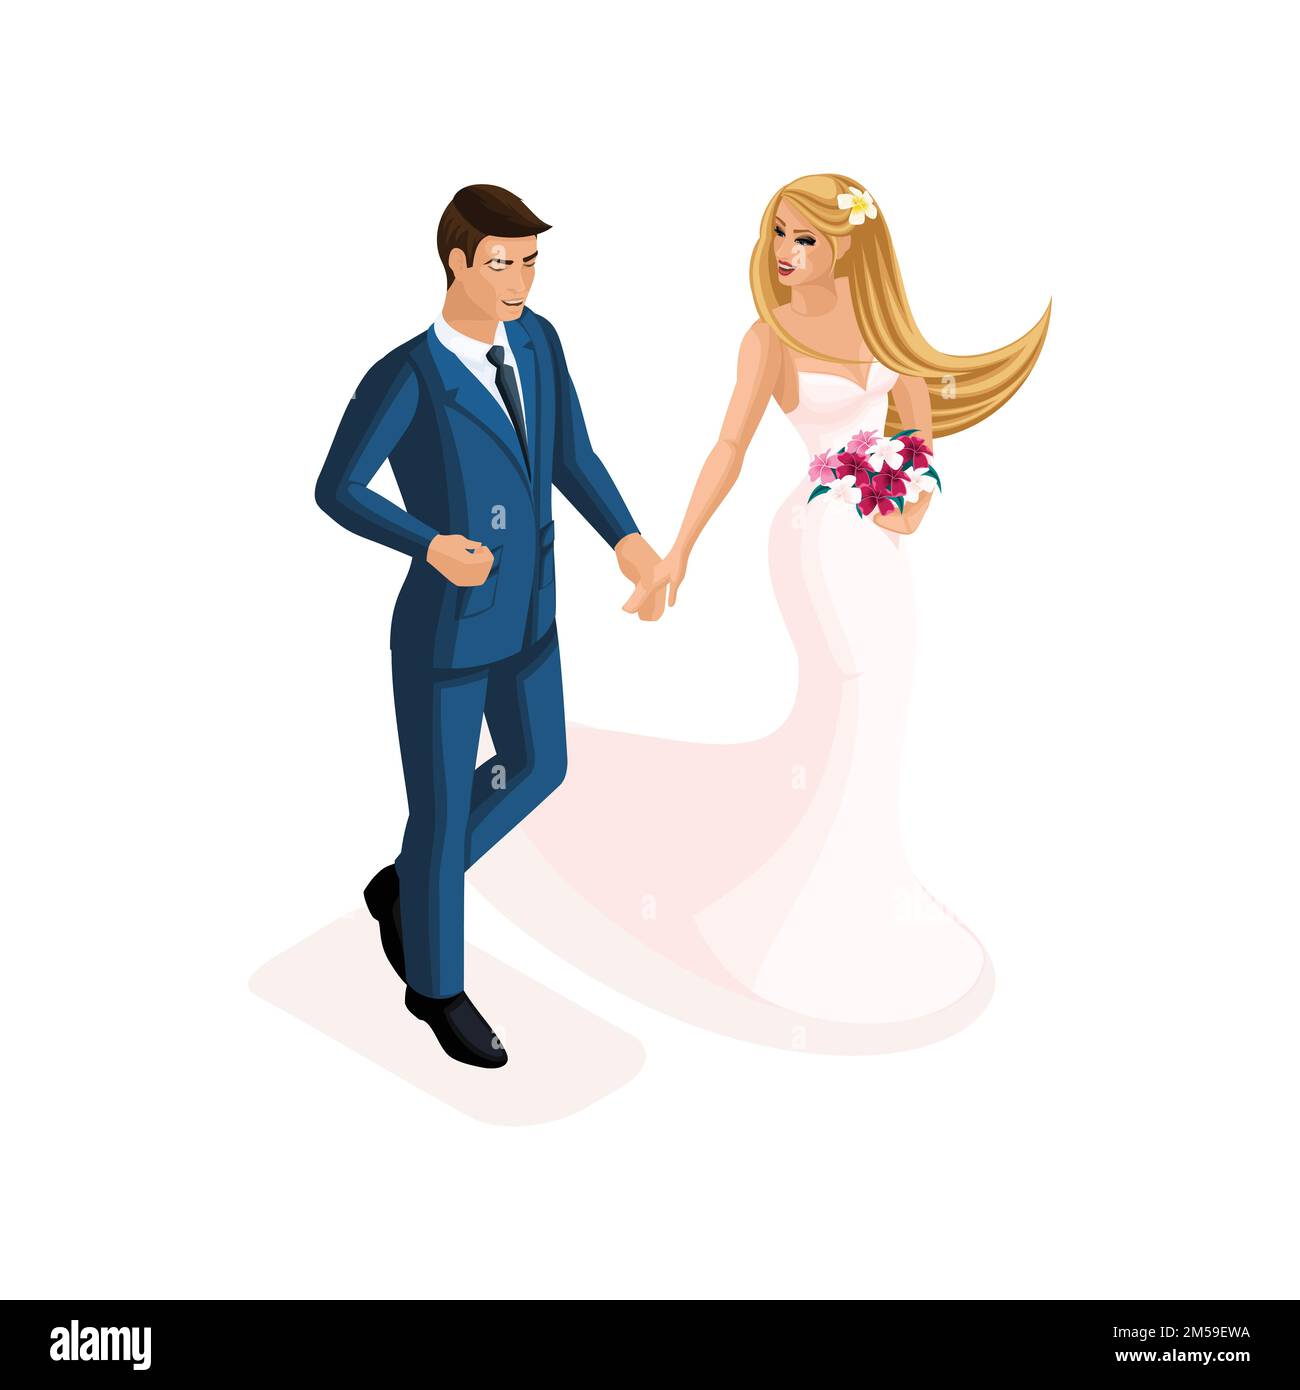 Isometry of a man and a woman at a marriage, the bride and groom in a gently pink wedding dress. Man in suit, girl with flowers. Stock Vector